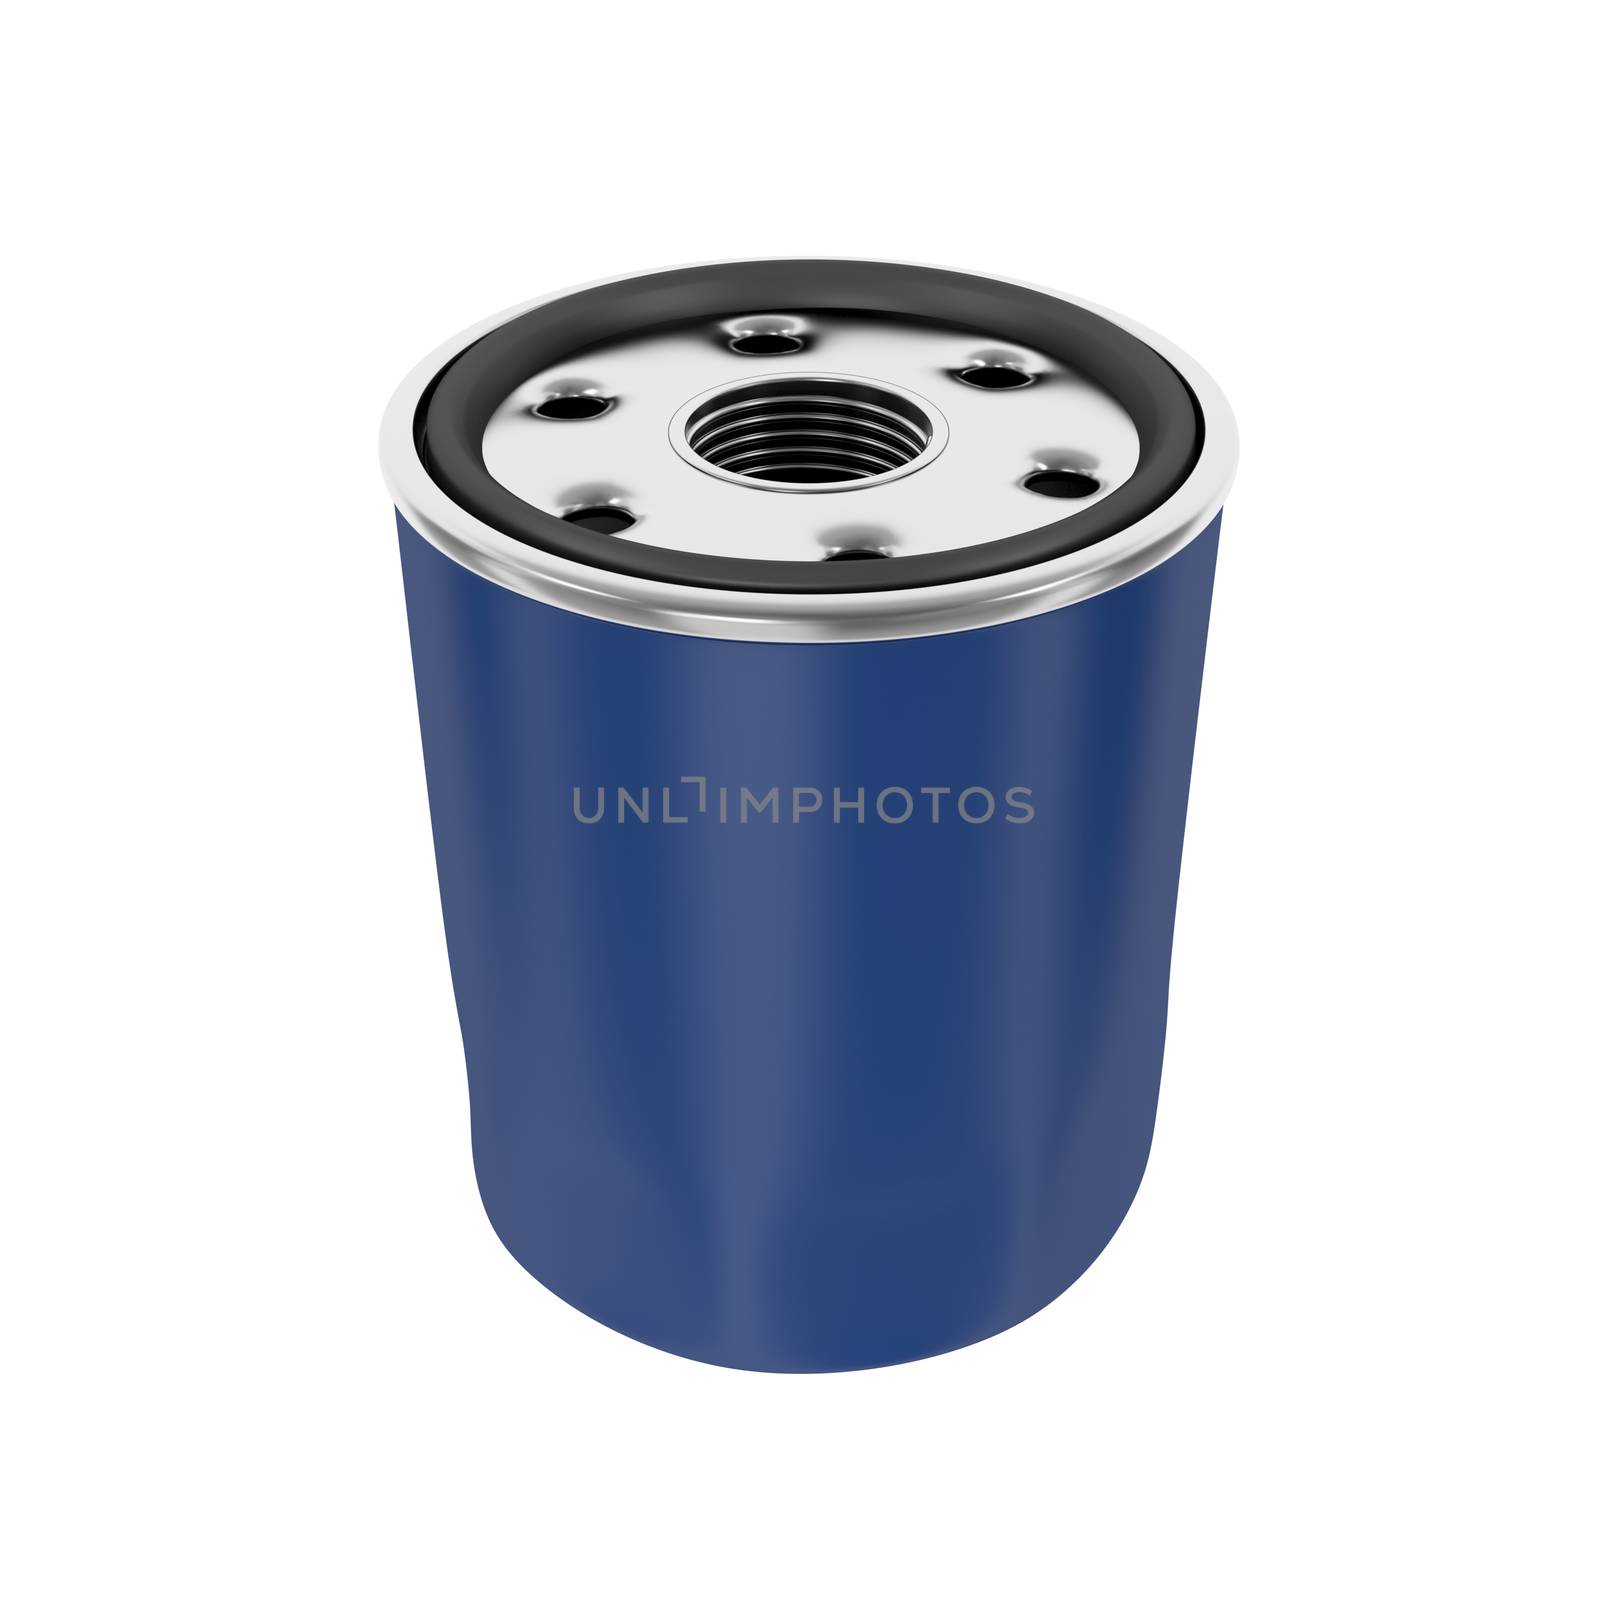 Oil filter isolated on a white background